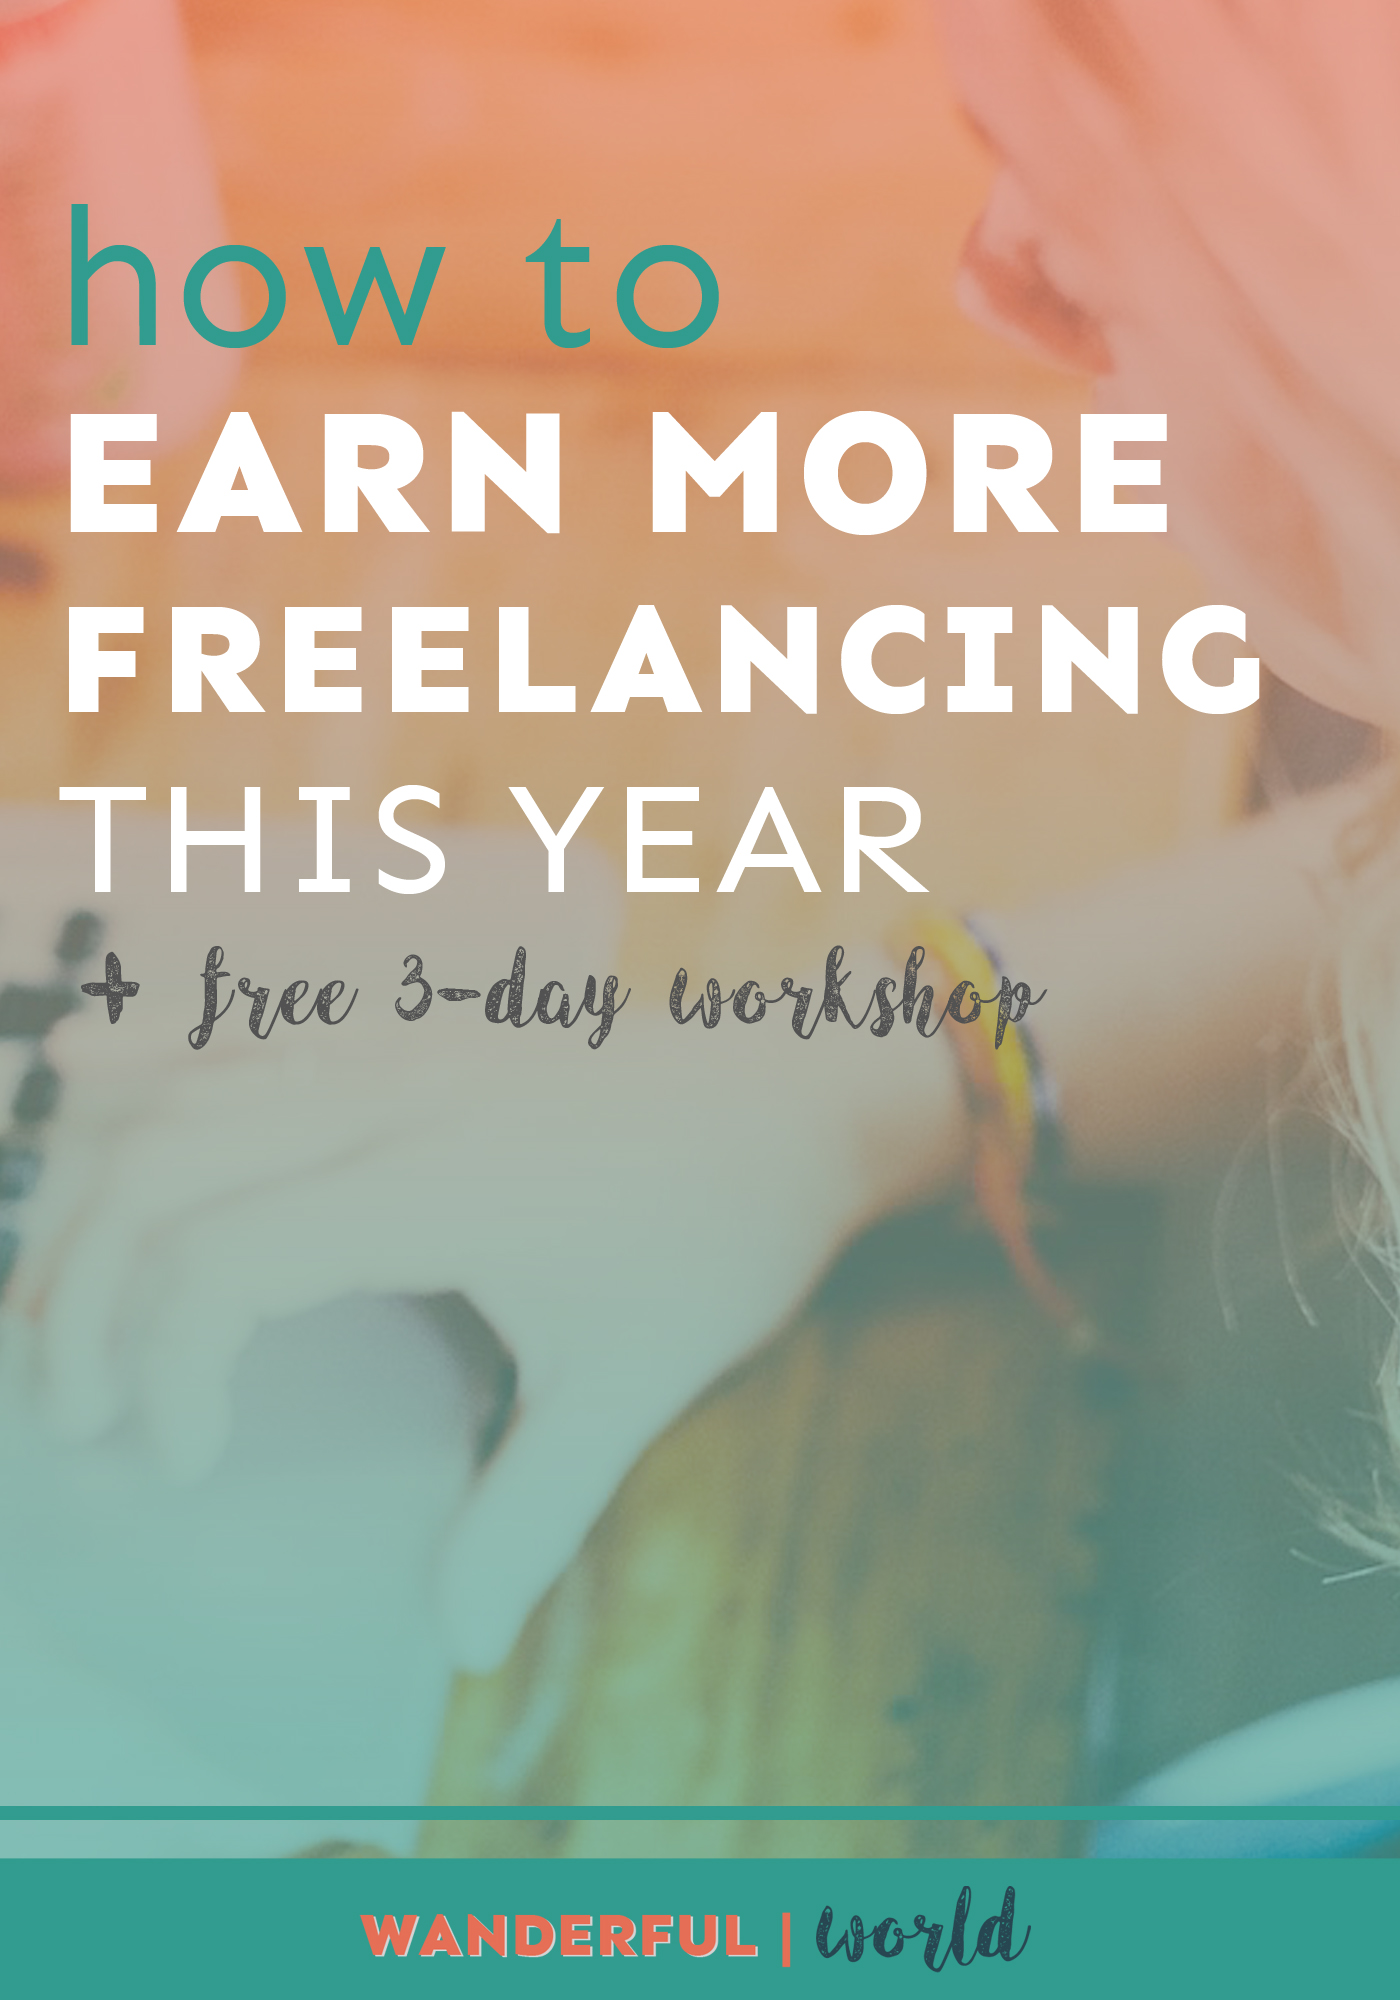 Ready to earn more freelancing this year? Here are four simple ways you can take your business to the next level.